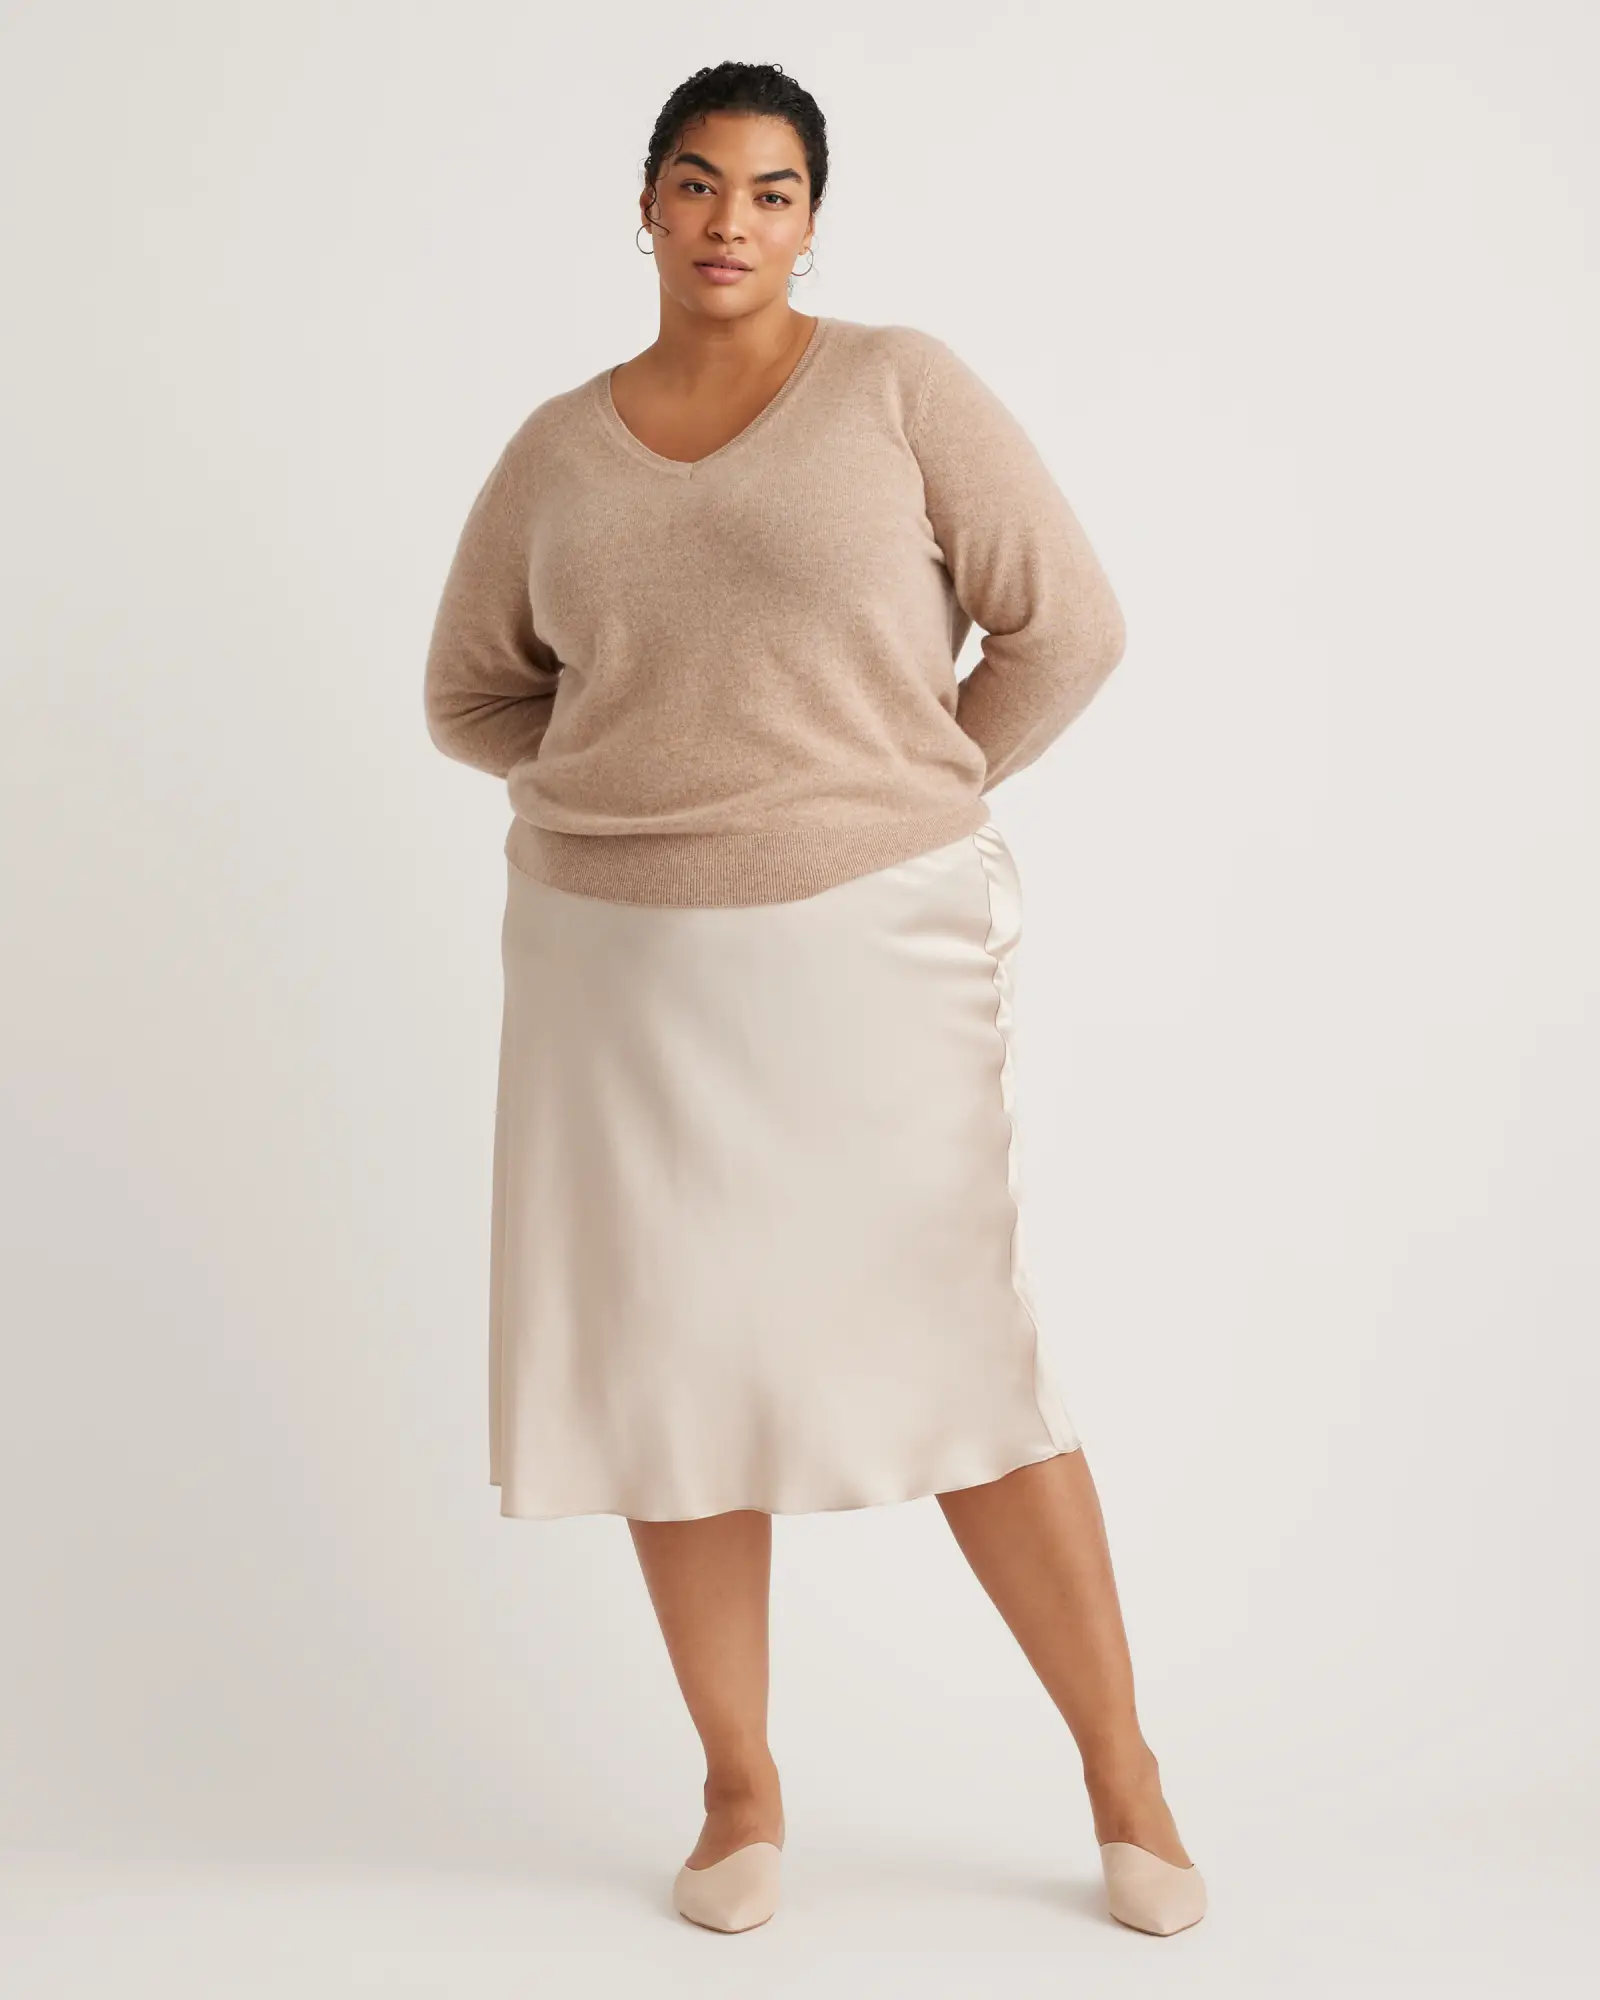 model wearing the Quince plus size mongolian v-neck sweater in camel with the champagne colored Quince washable silk skirt.